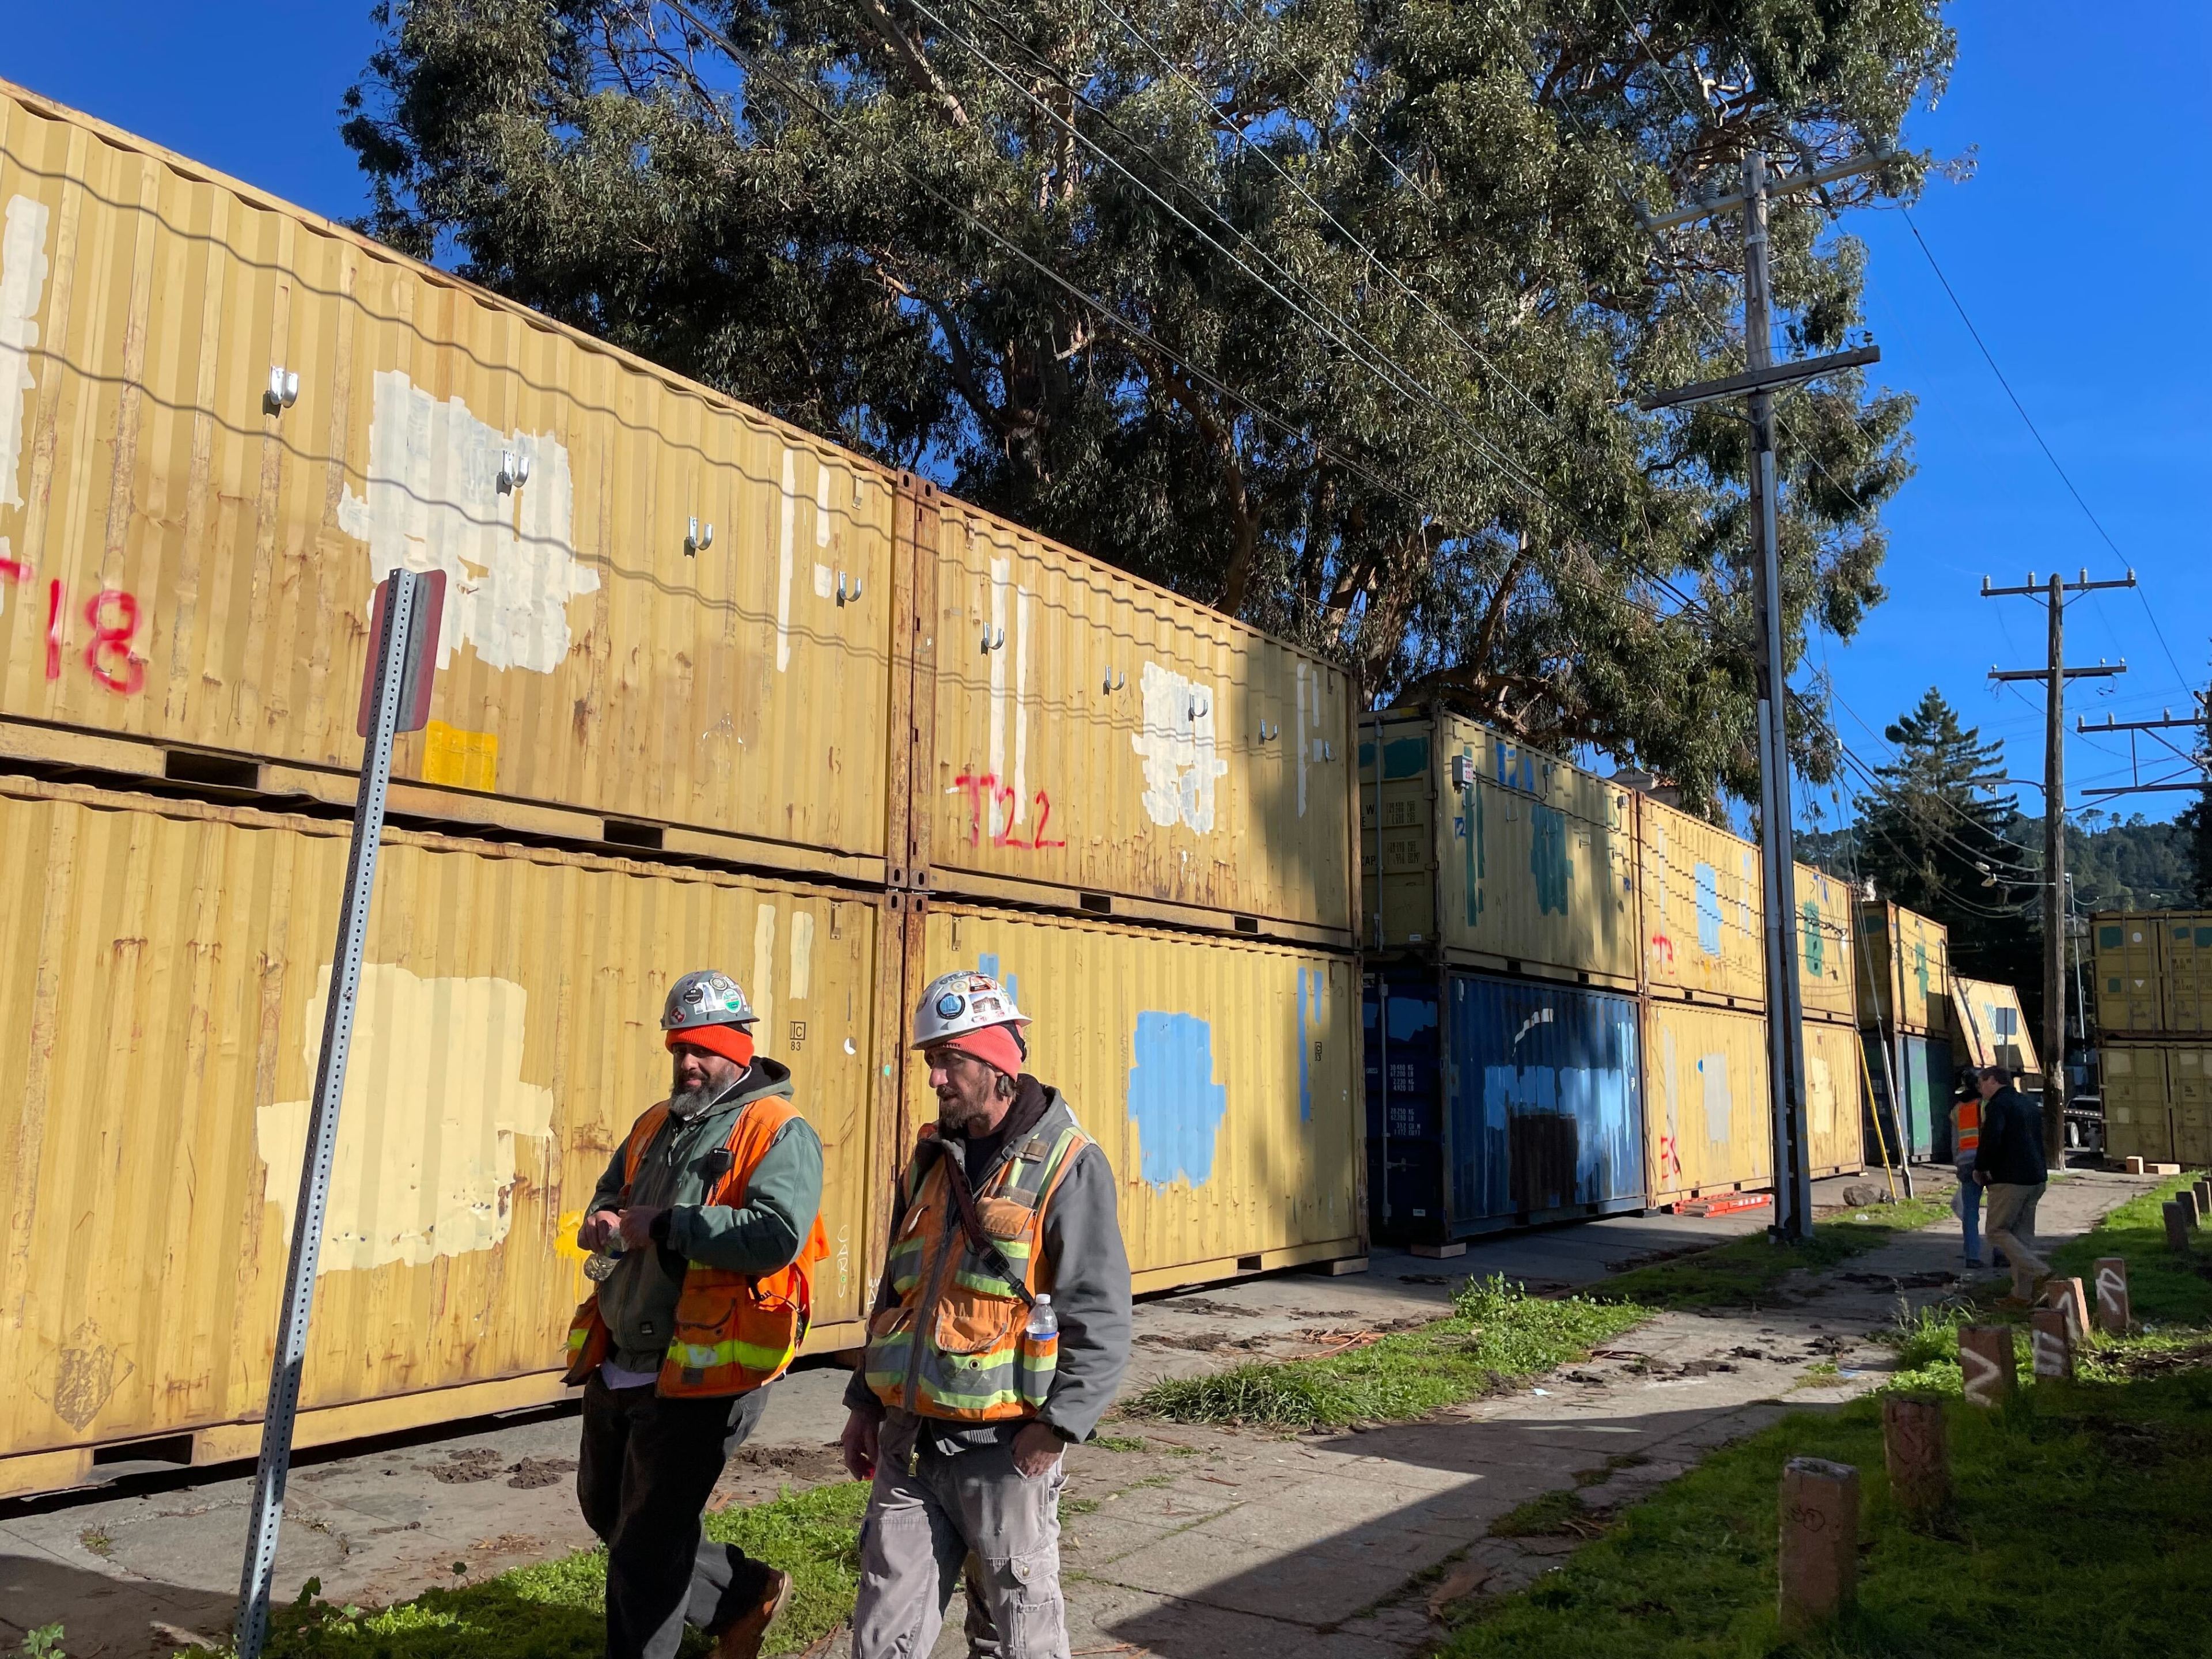 Two construction workers in high visibility vests and helmets walk and talk along a sidewalk beside a row of yellow double stacked shipping containers in a street.